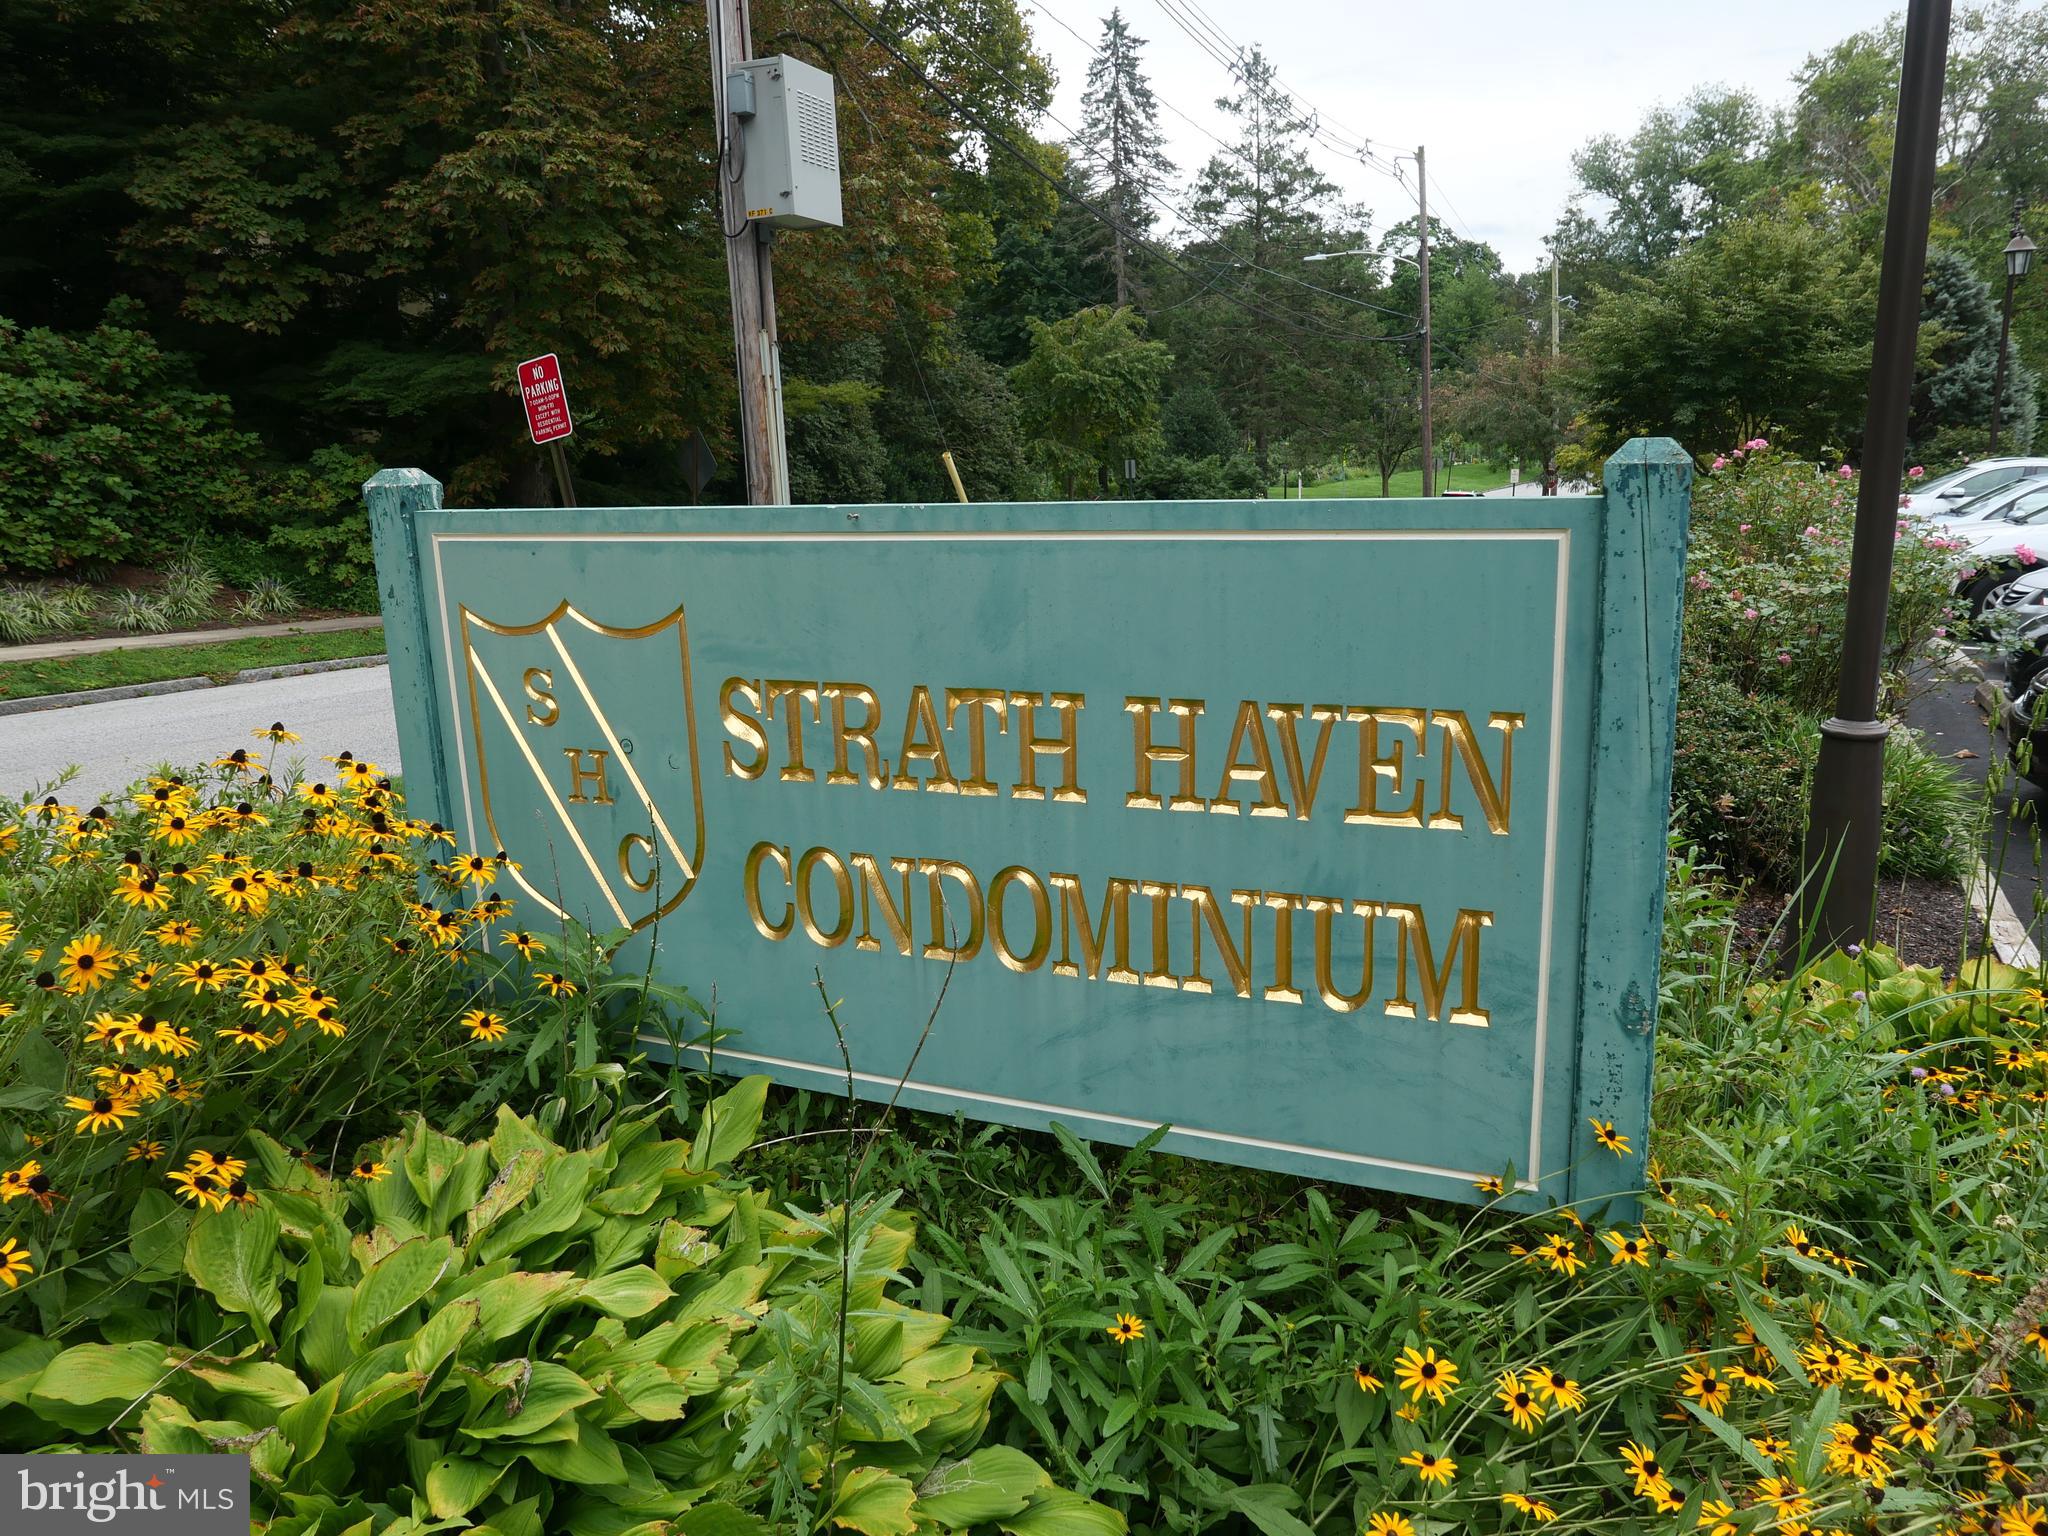 a view of sign board with flower plants